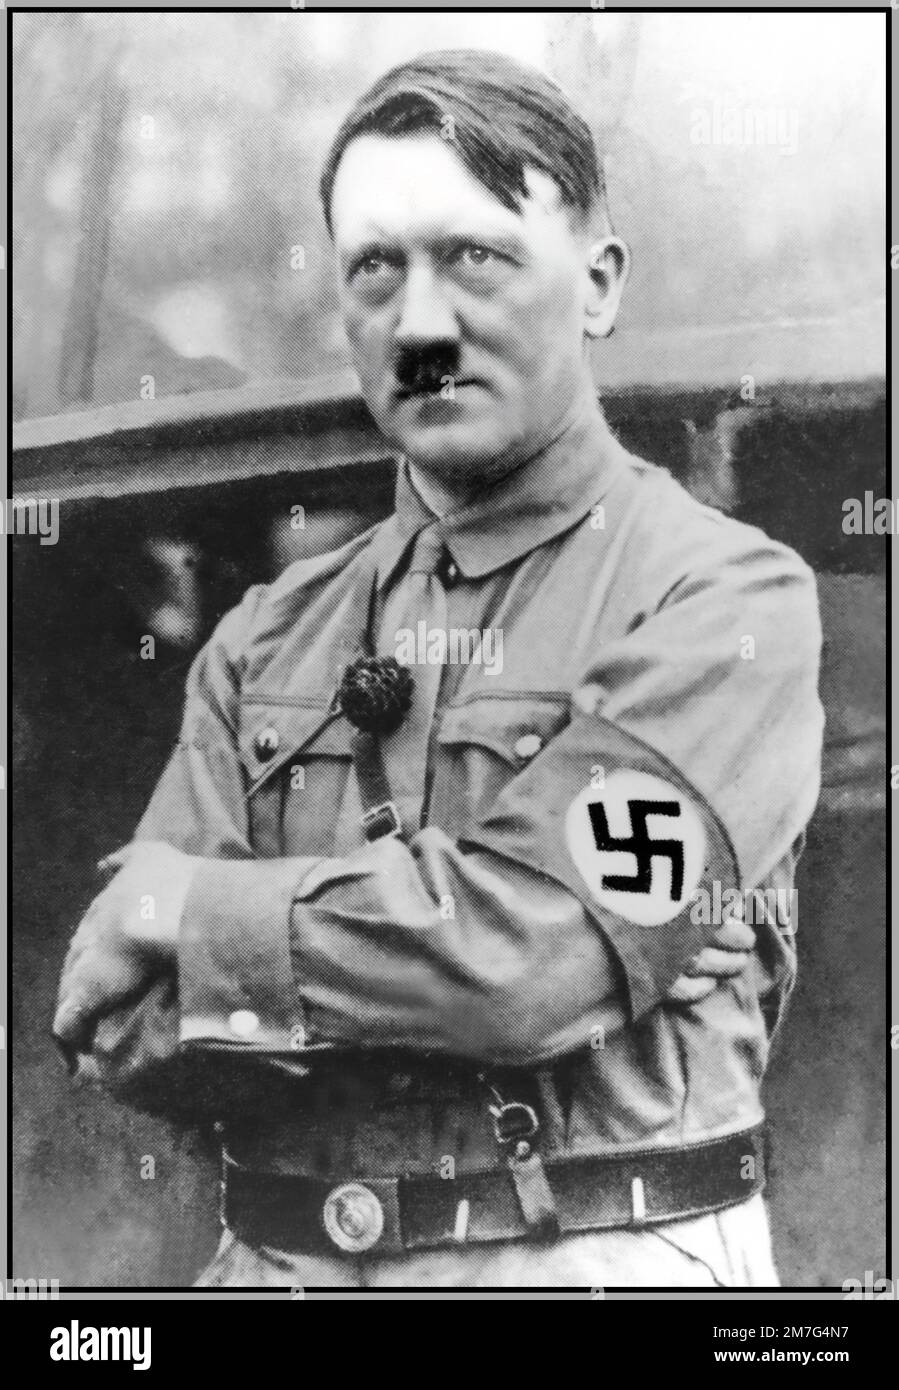 ARCHIVE 1932 Adolf Hitler NSDAP in SA uniform wearing a swastika armband at a political rally to decide the Reich presidential elections Hitler subsequently became Chancellor of Germany. The rise to power. 1930s Nazi Germany Stock Photo